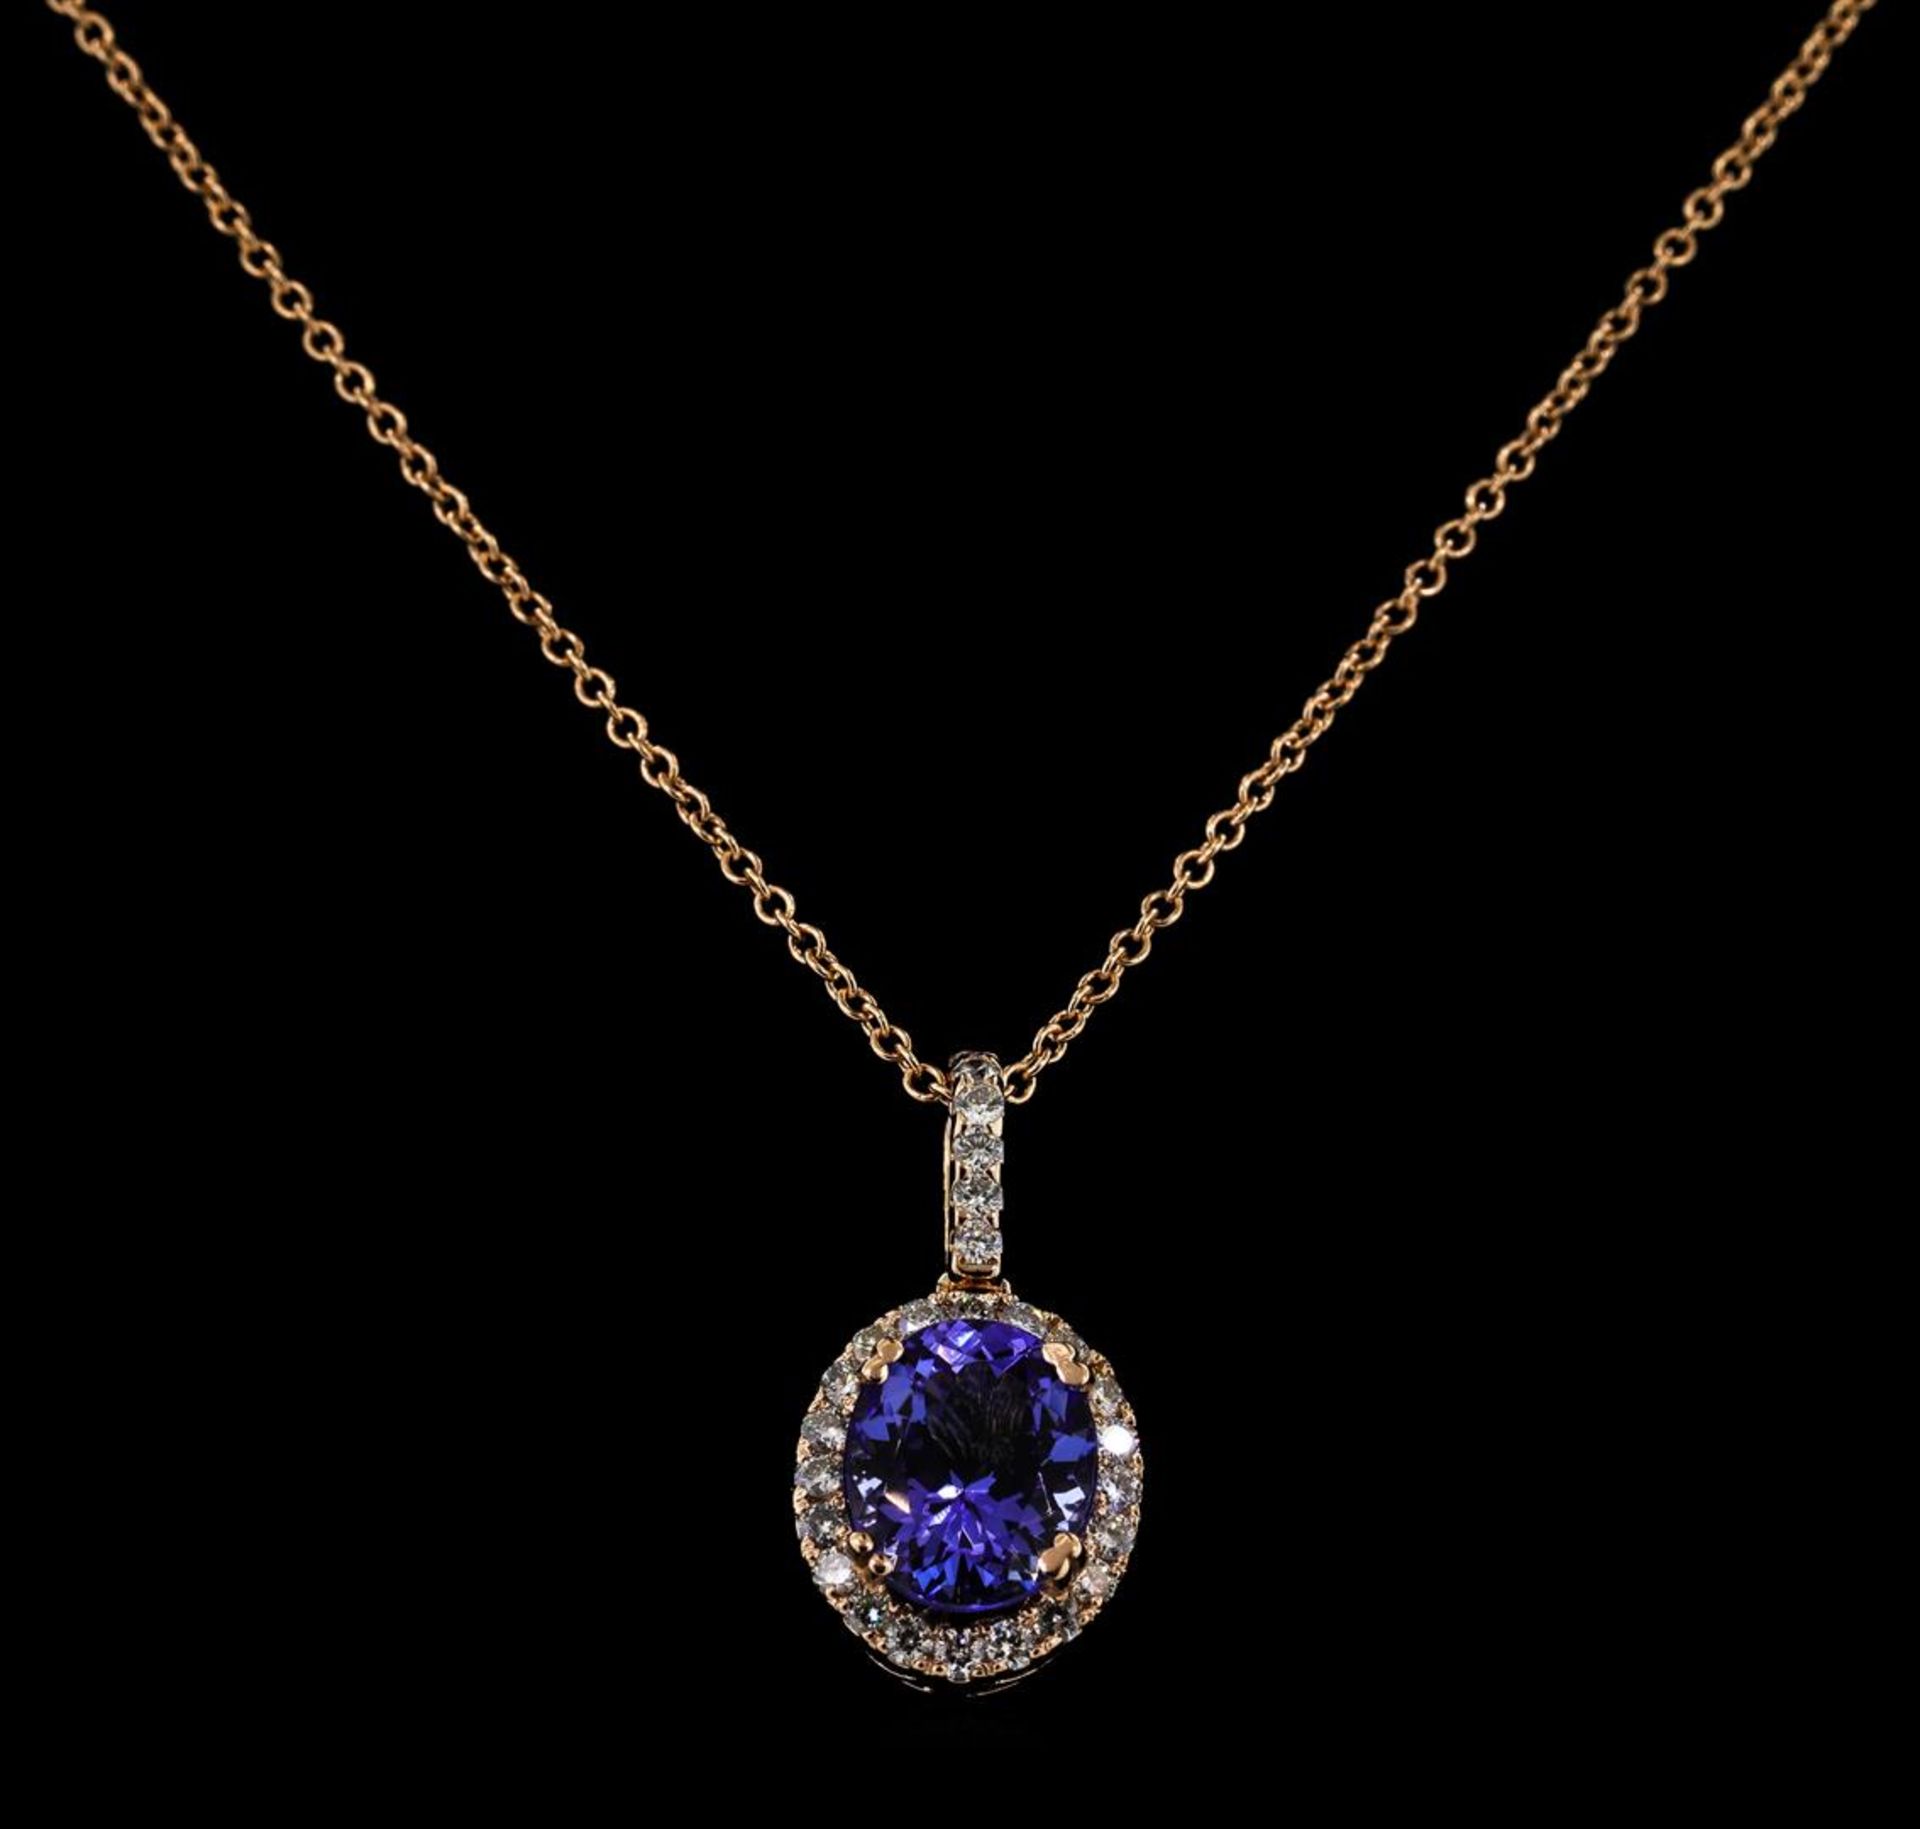 2.46ct Tanzanite and Diamond Pendant With Chain - 14KT Rose Gold - Image 2 of 2